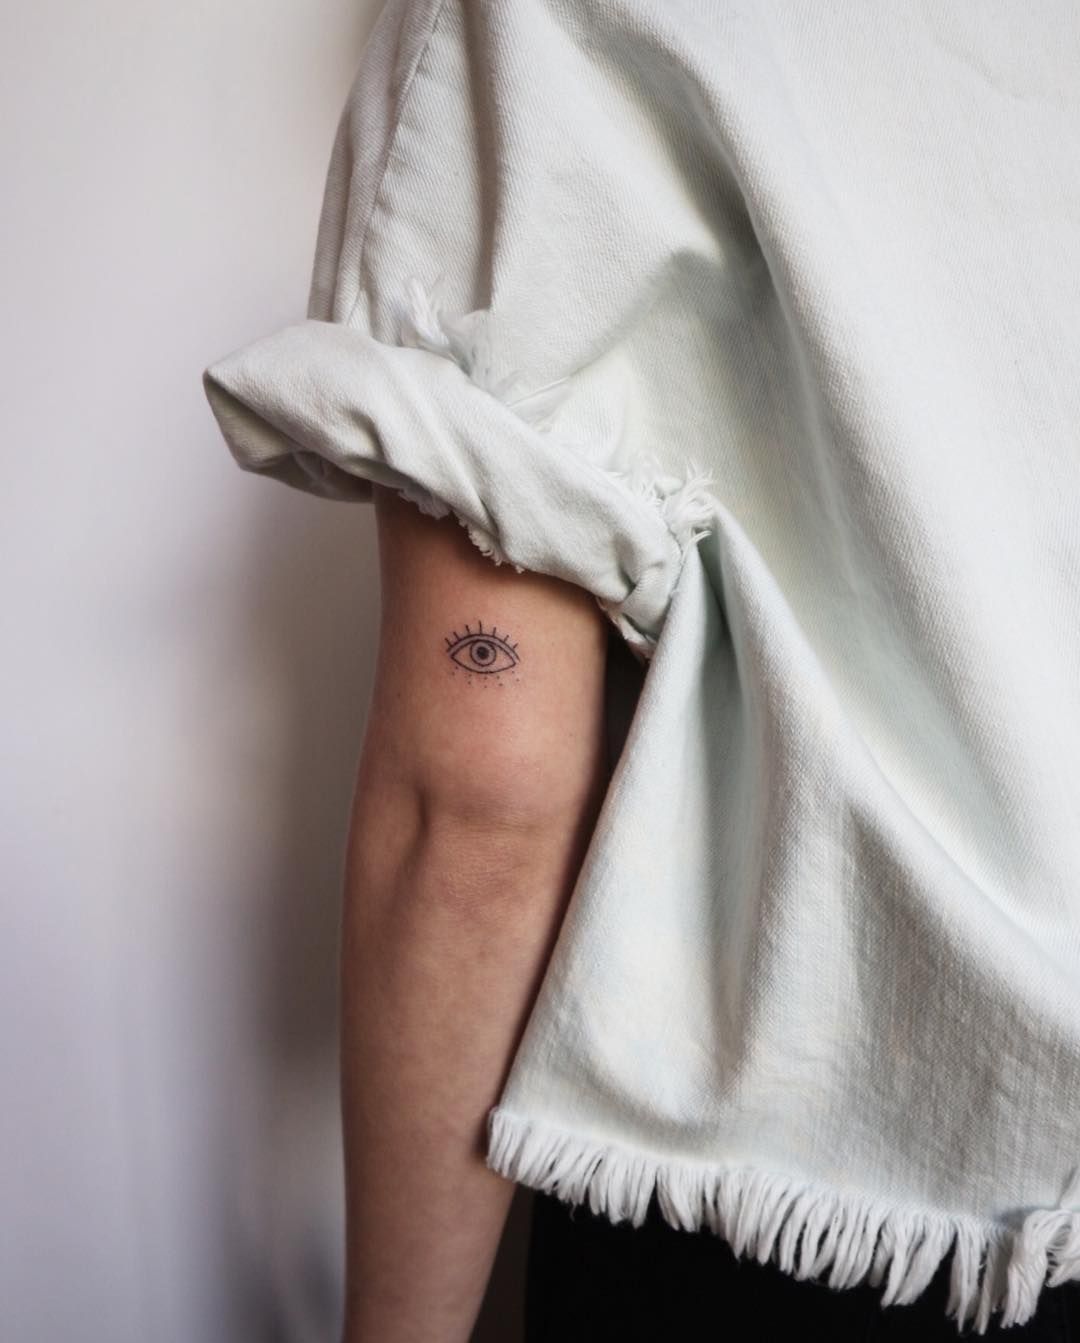 55 Seriously Tiny Tattoos You'll Want To Add To Your Ink Collection ASAP